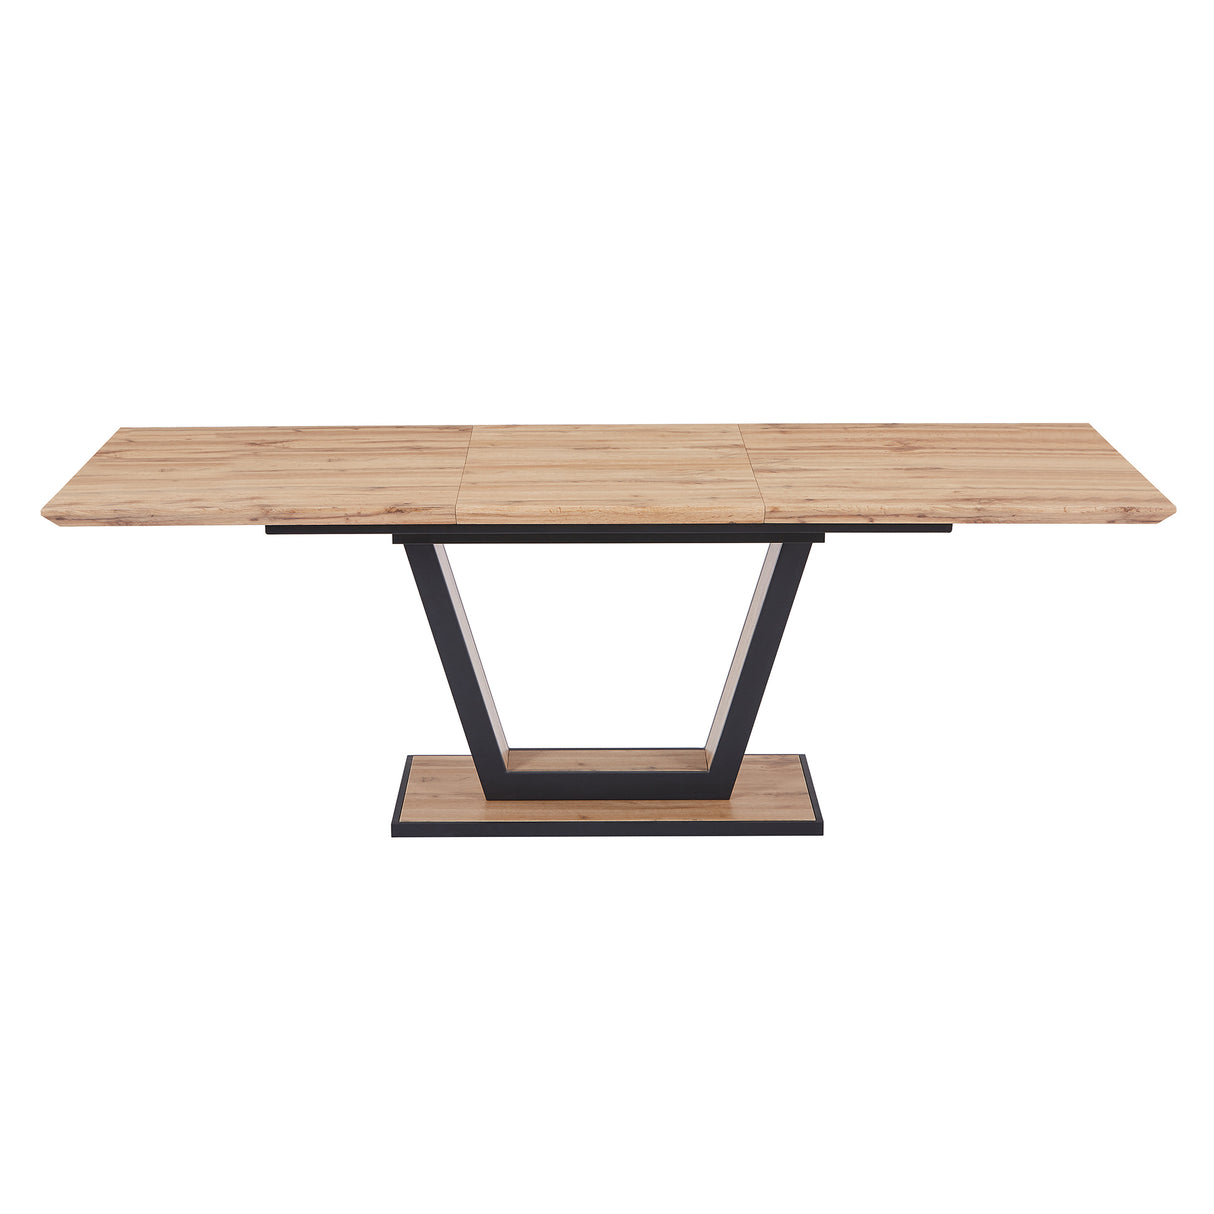 Forna Extension Dining Table Natural